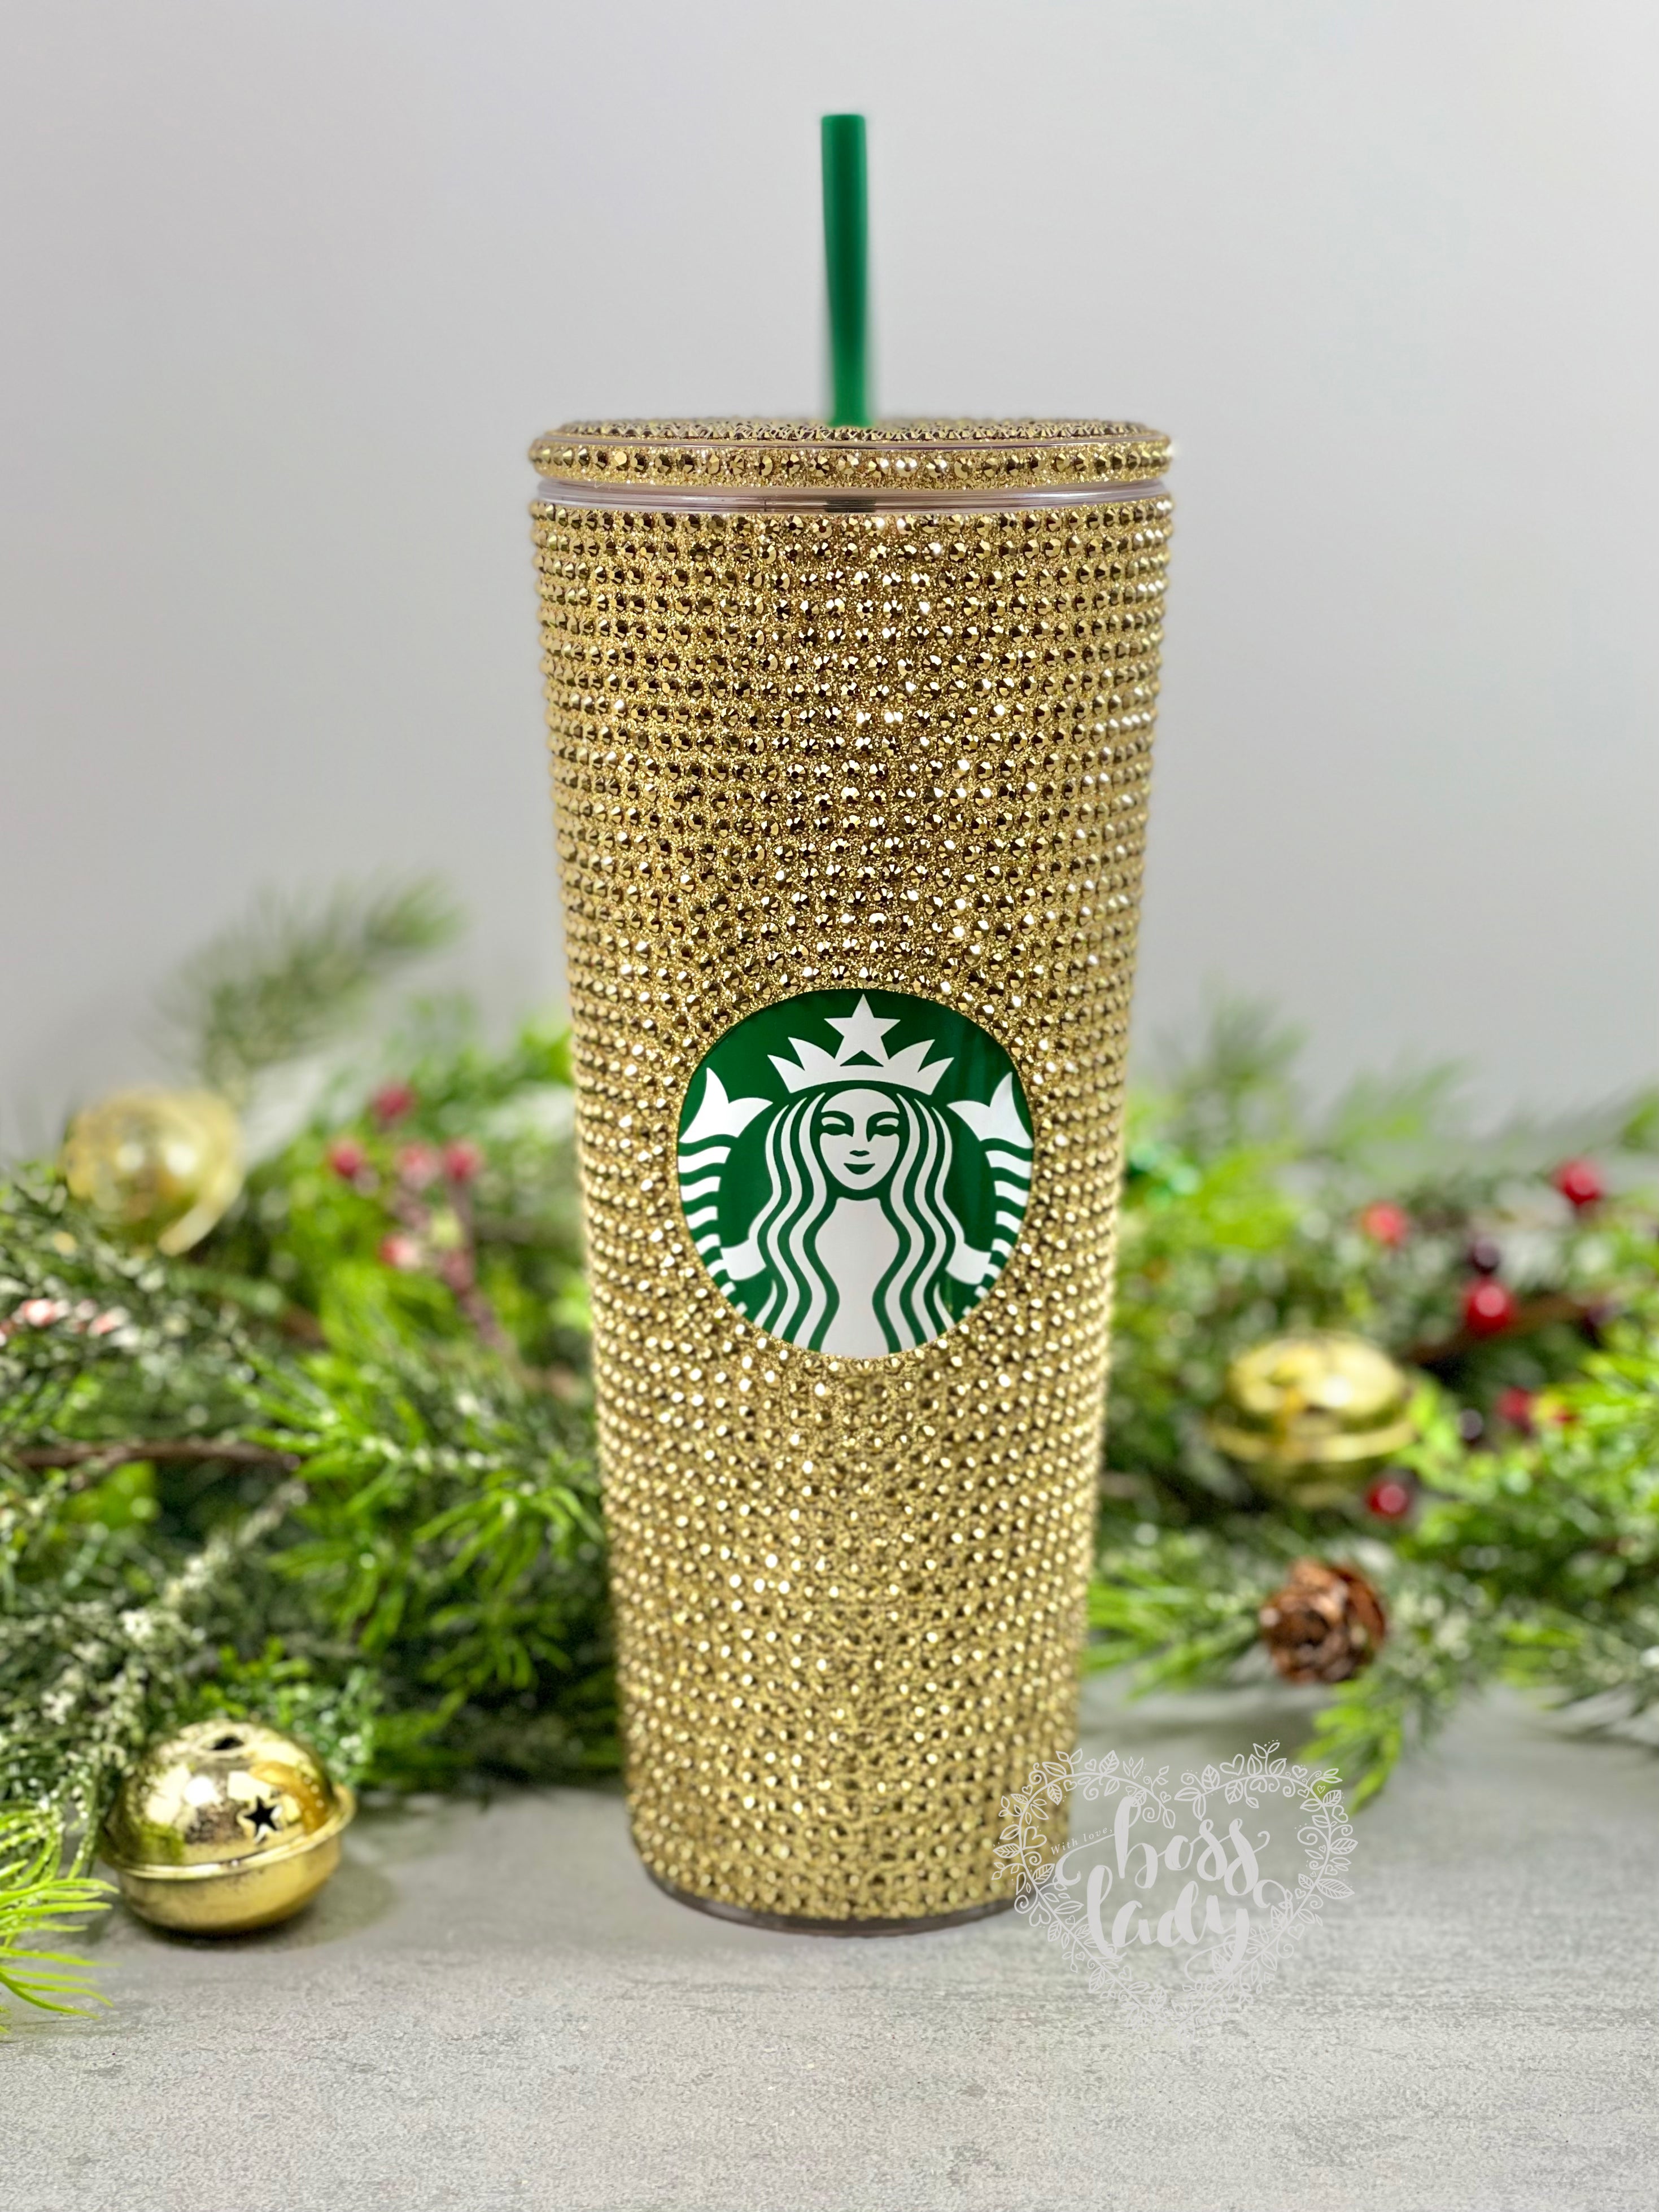 Starbucks Acrylic Tumbler with Gold Diamond Cut Crystals | Bedazzled  Starbucks Cup